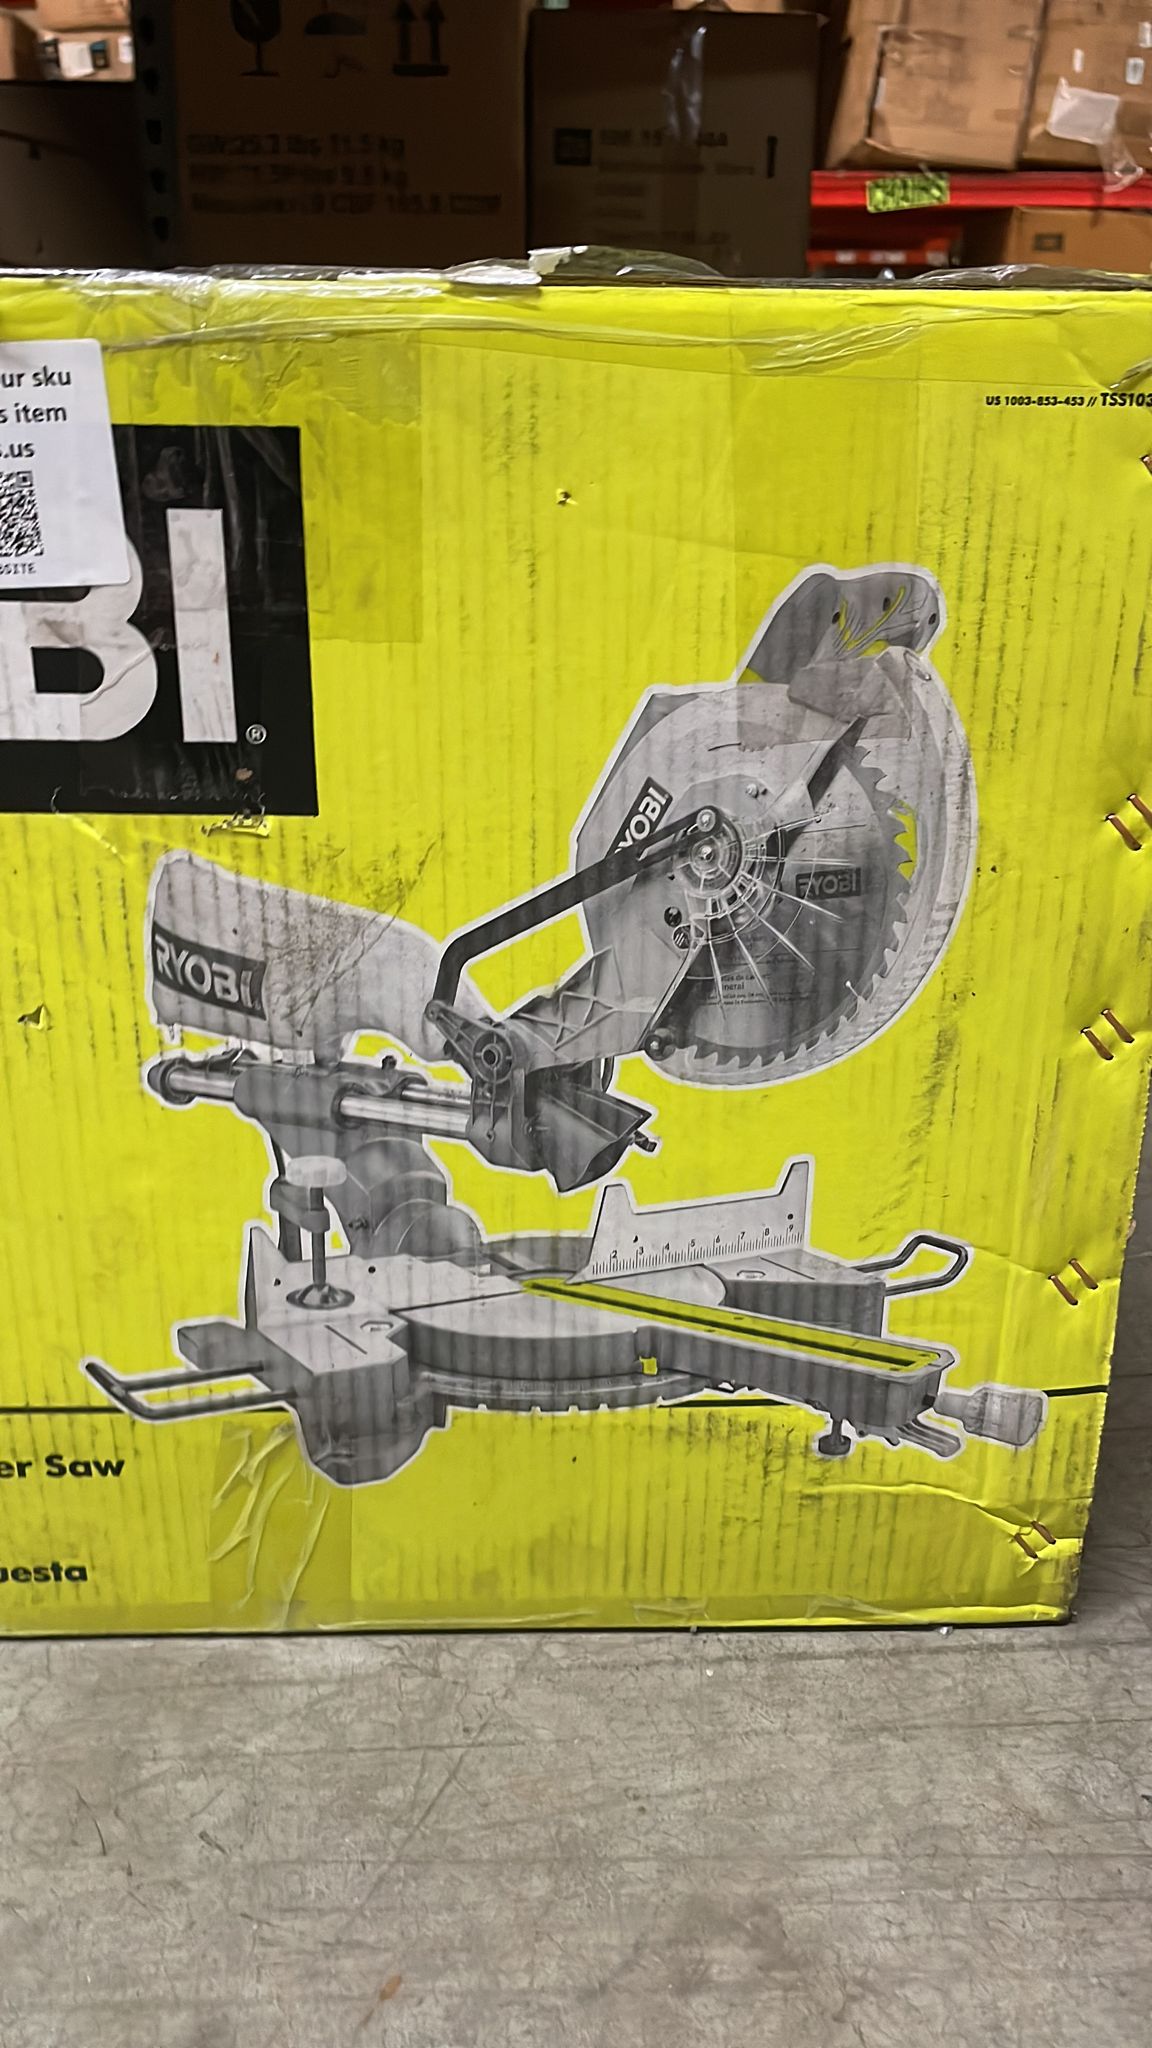 RYOBI 15 Amp 10 in. Corded Sliding Compound Miter Saw with LED Cutline Indicator - $245